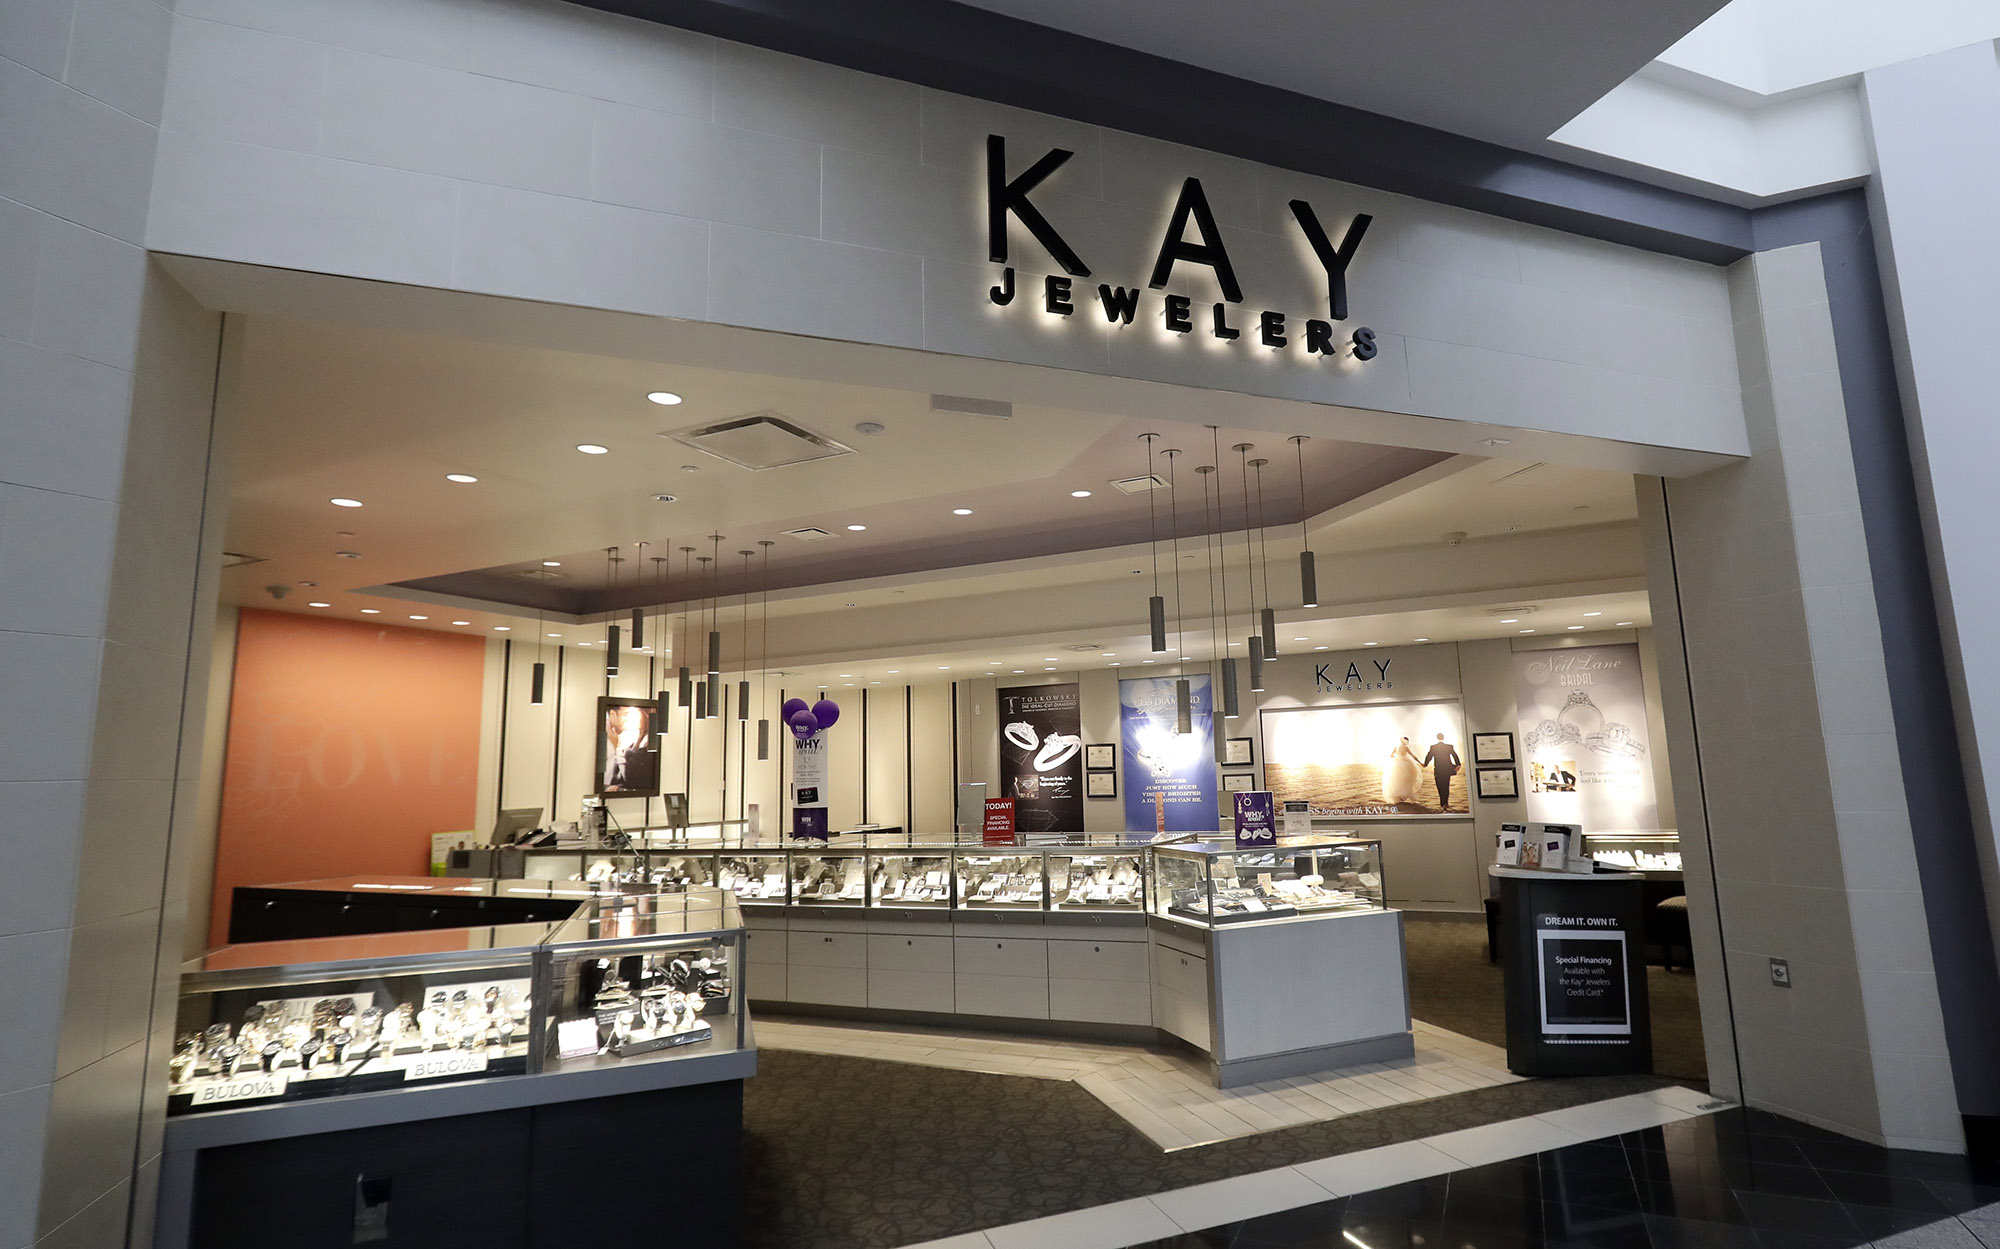 Signet (SIG) Predicts Sales of $10 Billion for Kay, Zales on Wedding ...